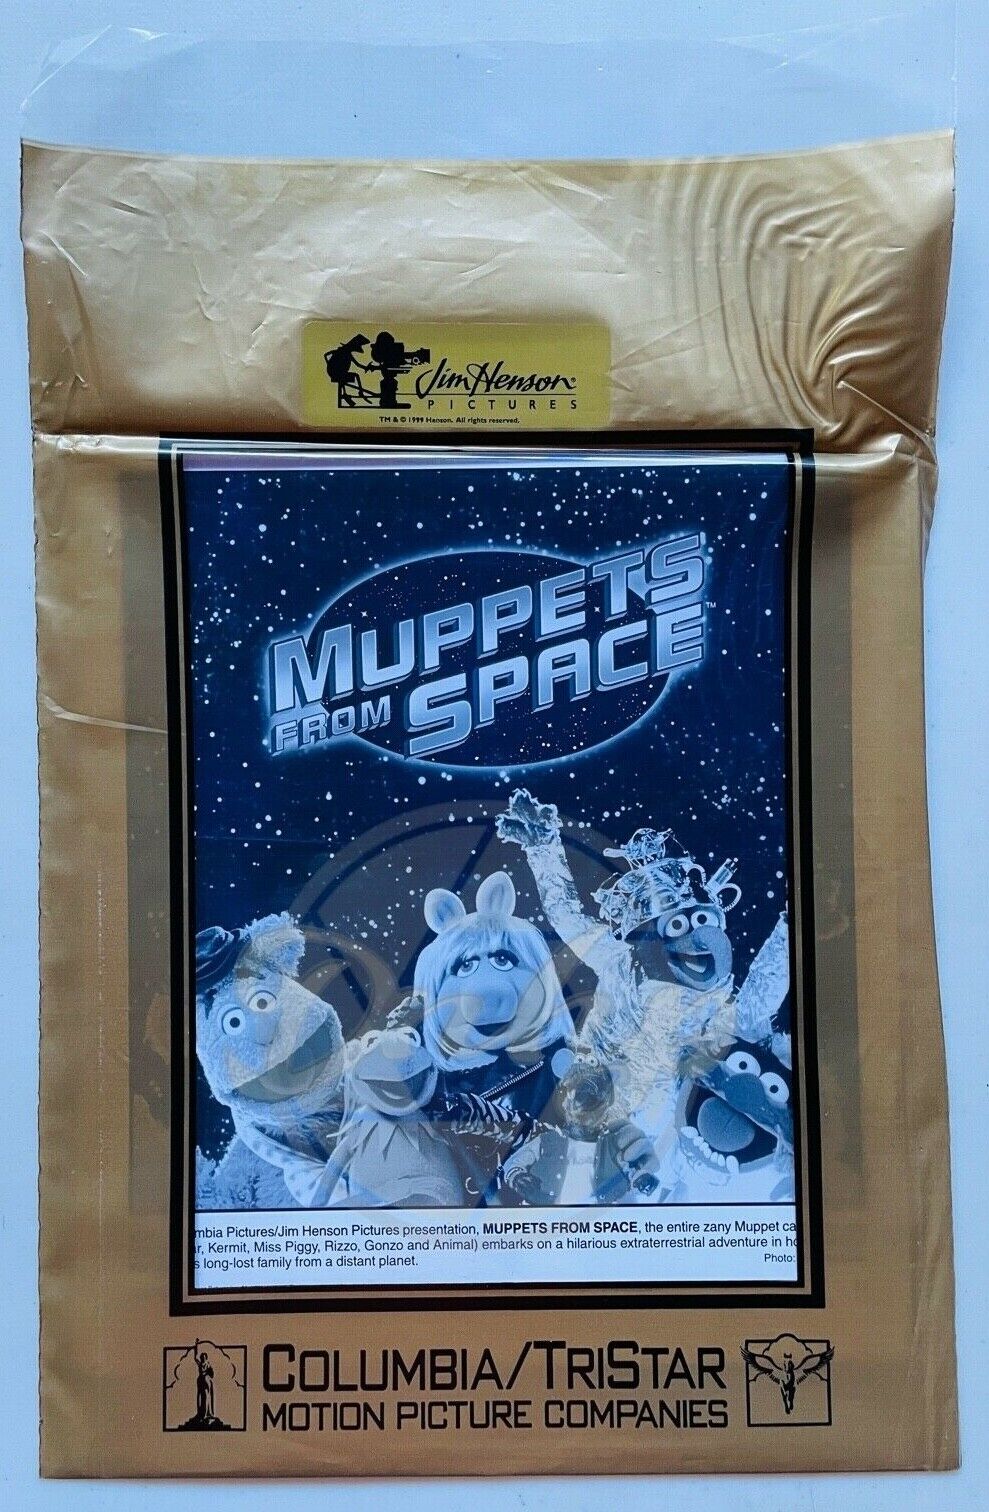 MUPPETS FROM SPACE Lot 8x10 B&W (4 photos) 1999 Promo Press Kit Lobby Cards Без бренда